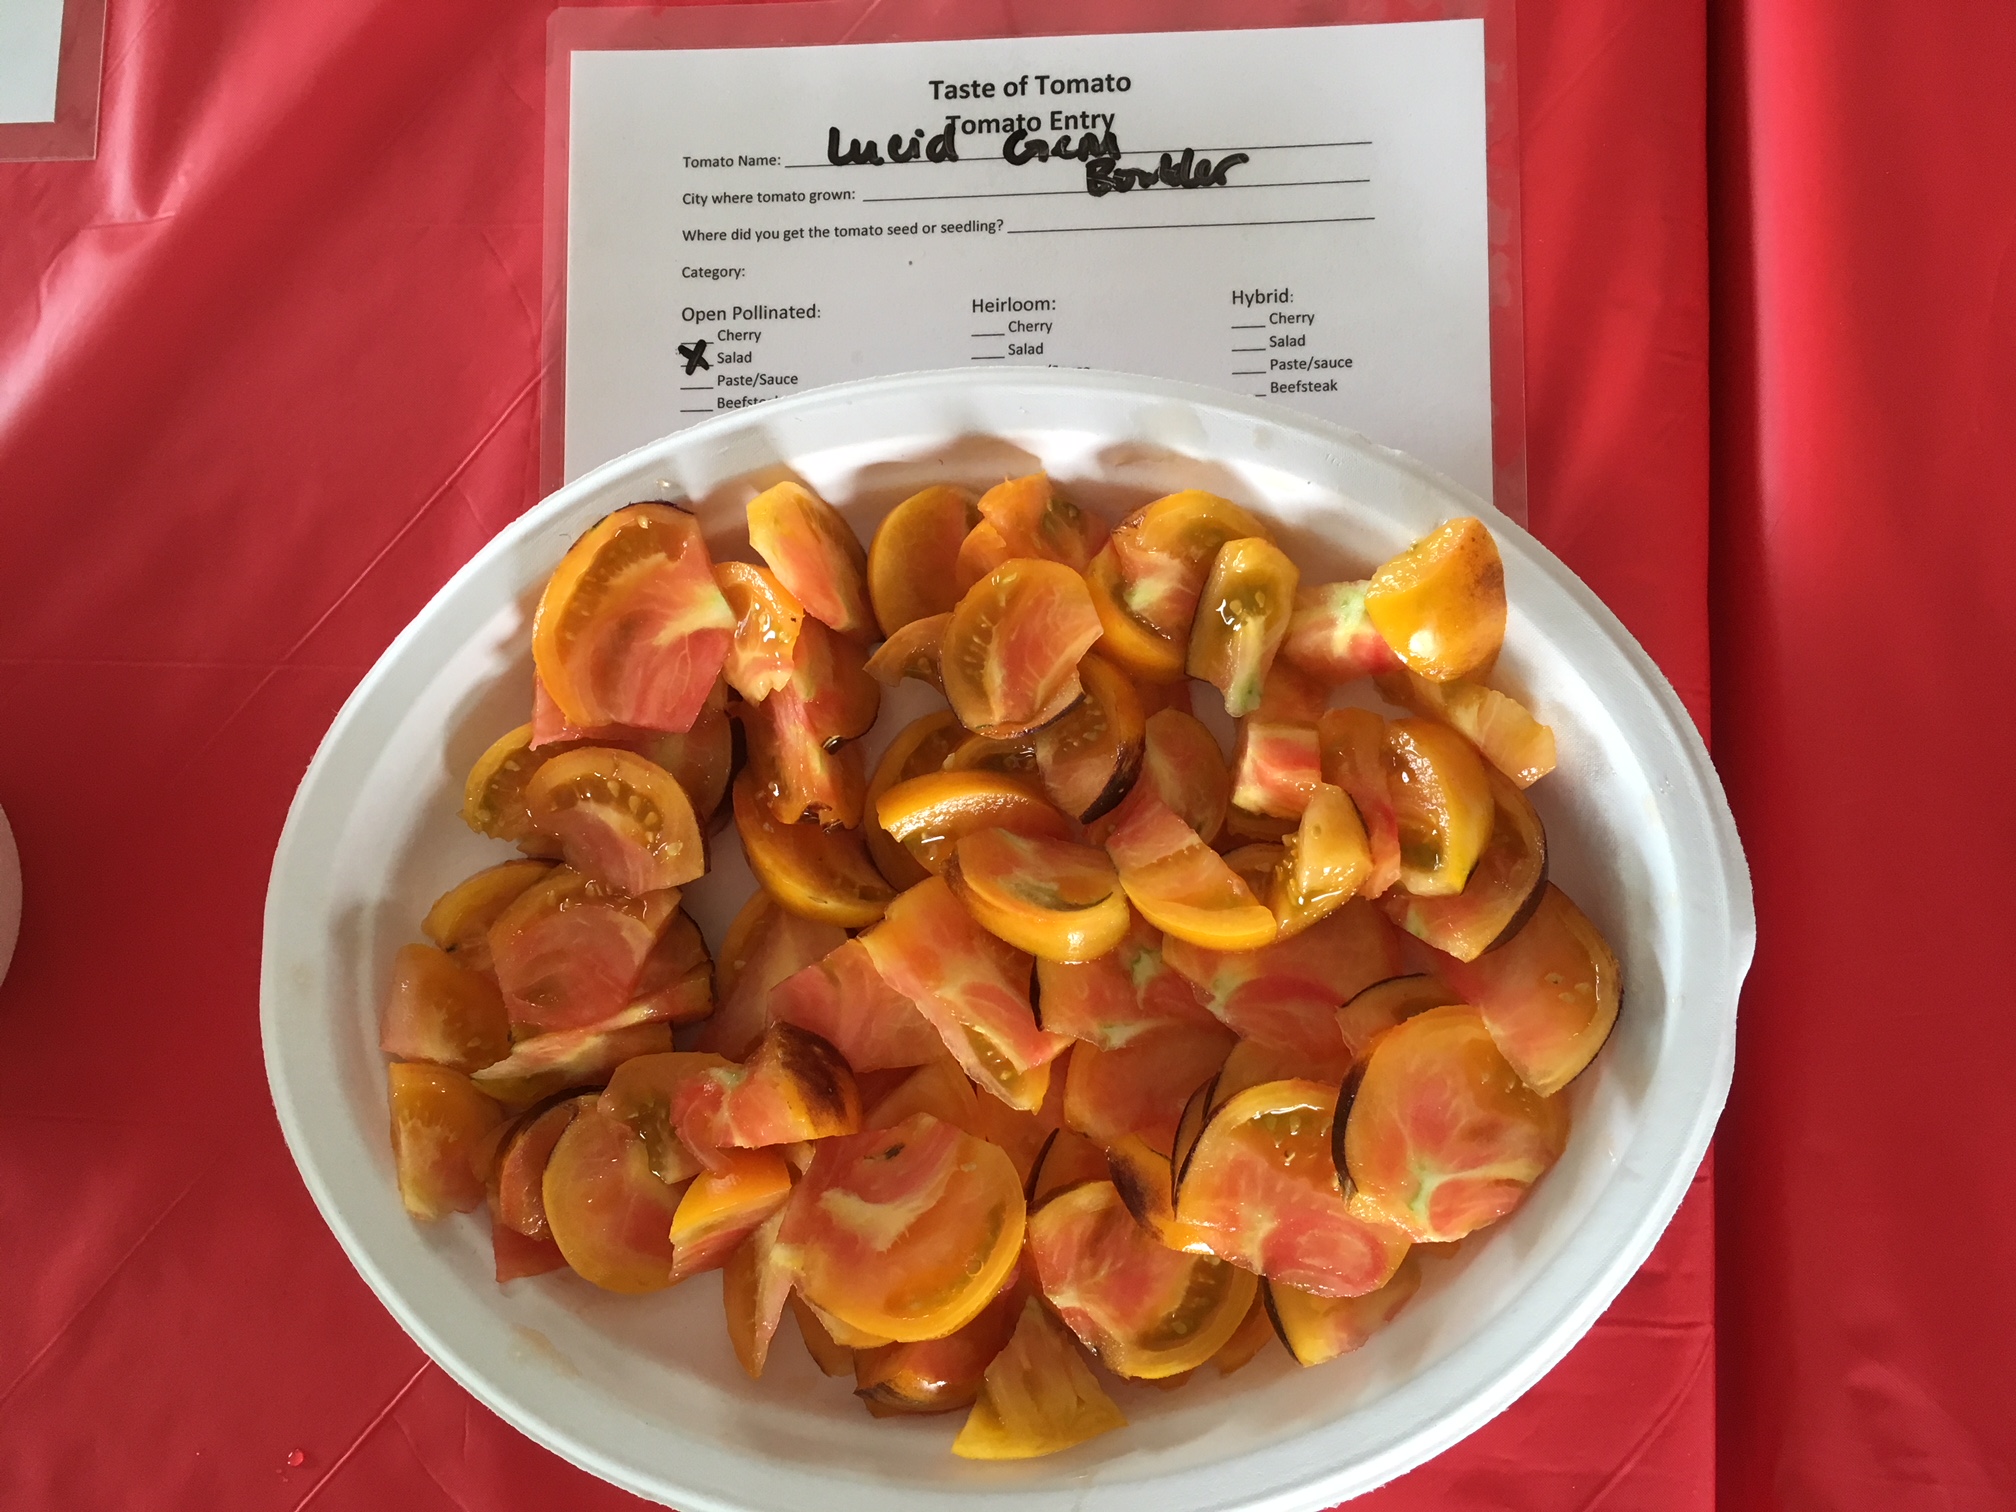 tomatoes cut up for tasting